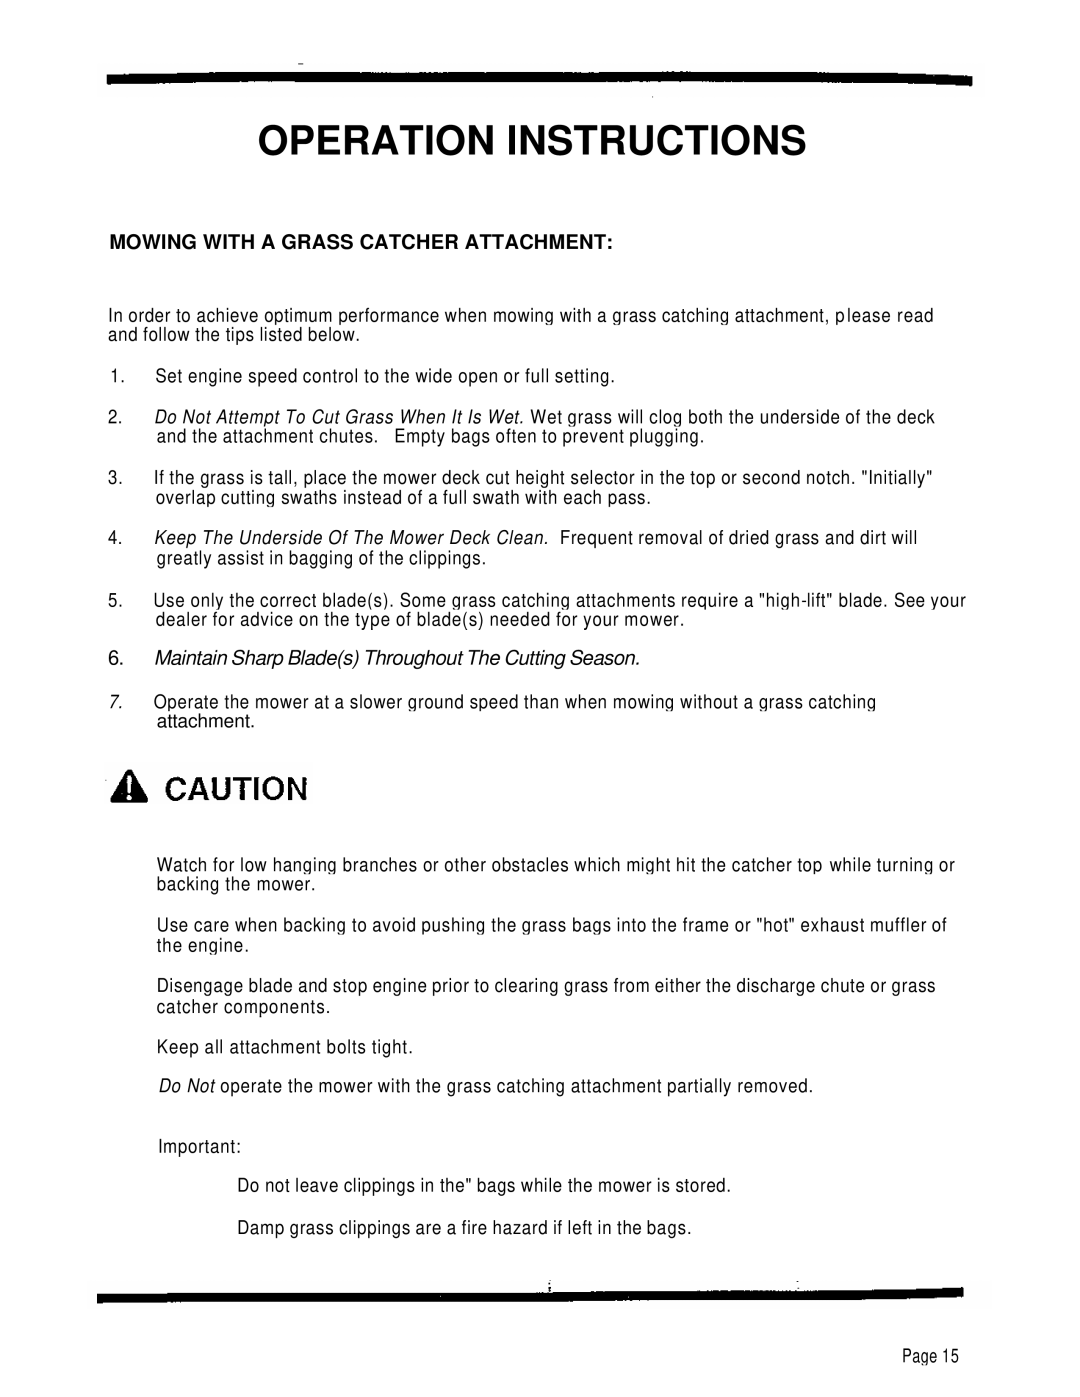 Dixon 4000 Series manual Operation Instructions, Mowing With A Grass Catcher Attachment 